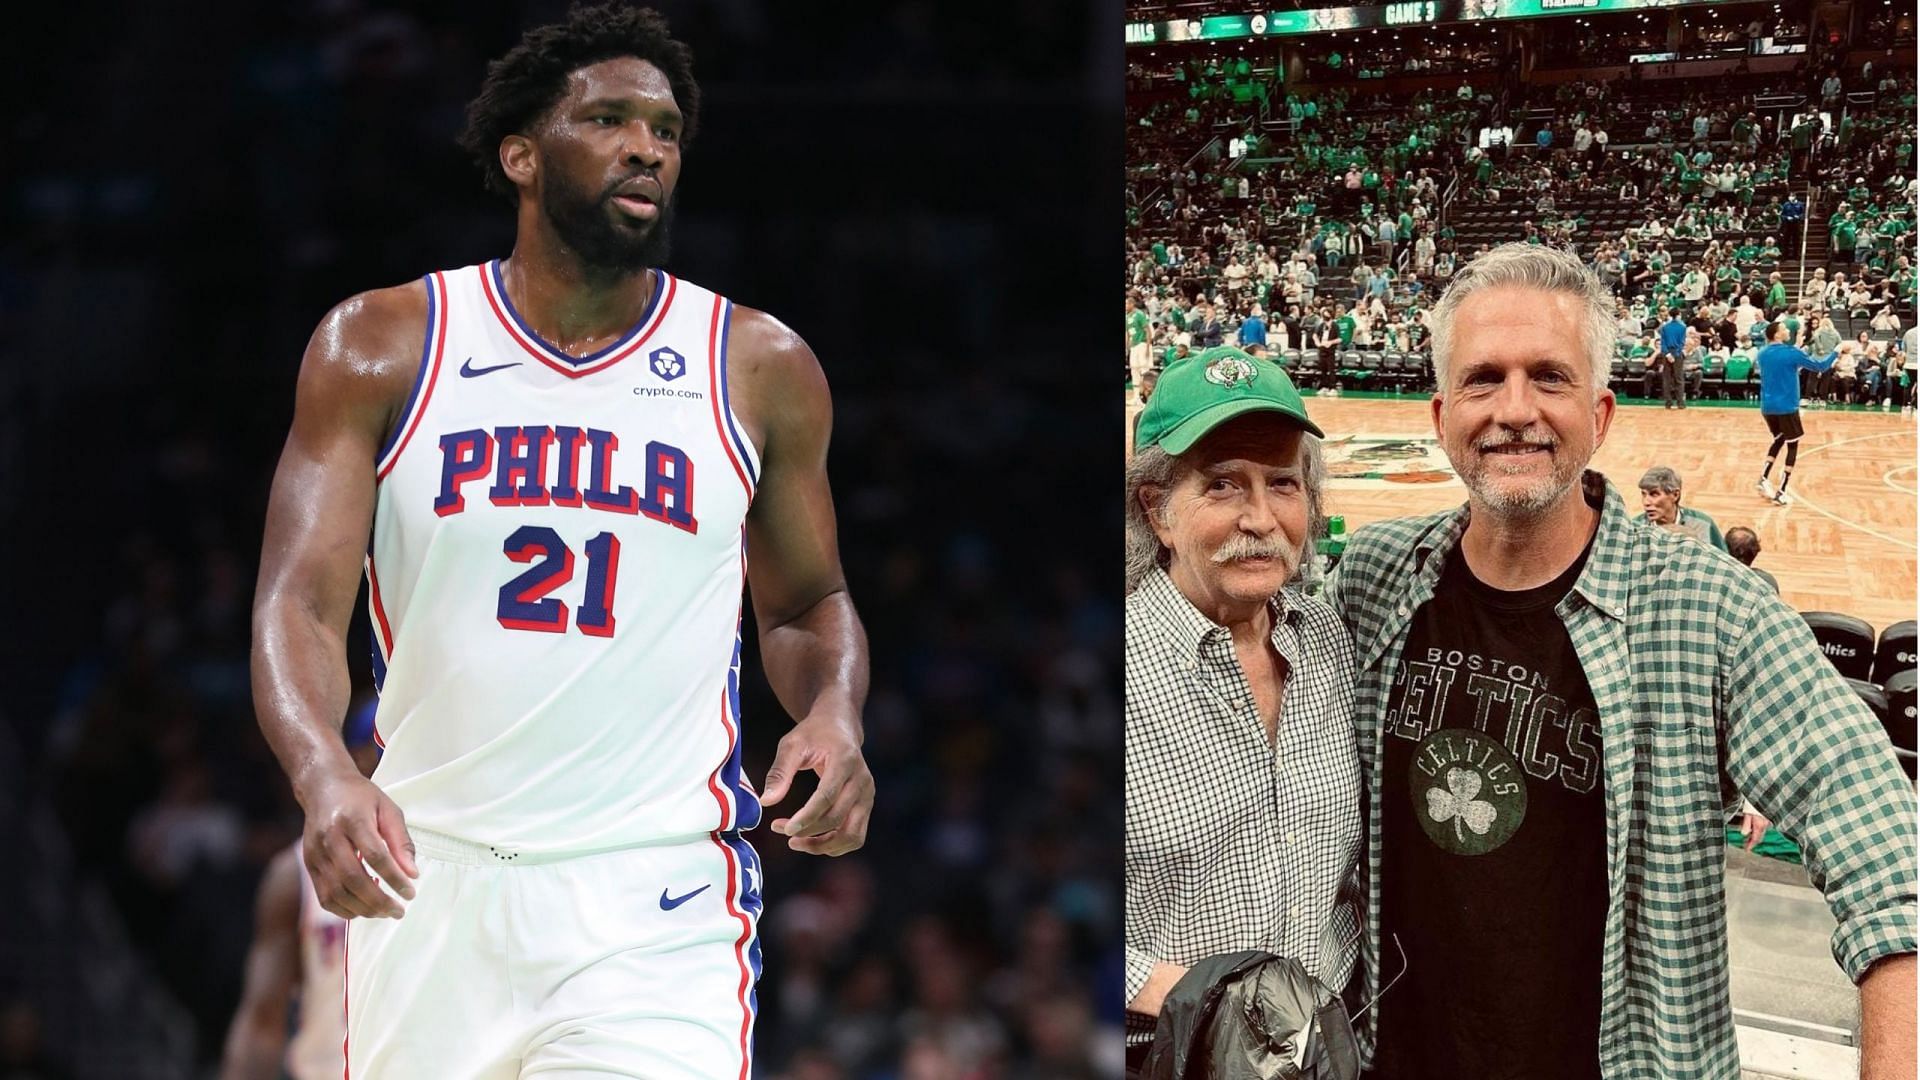 &quot;Embiid is not a winner&quot;: NBA fans rebuke after Bill Simmons declares Joel Embiid king of the post